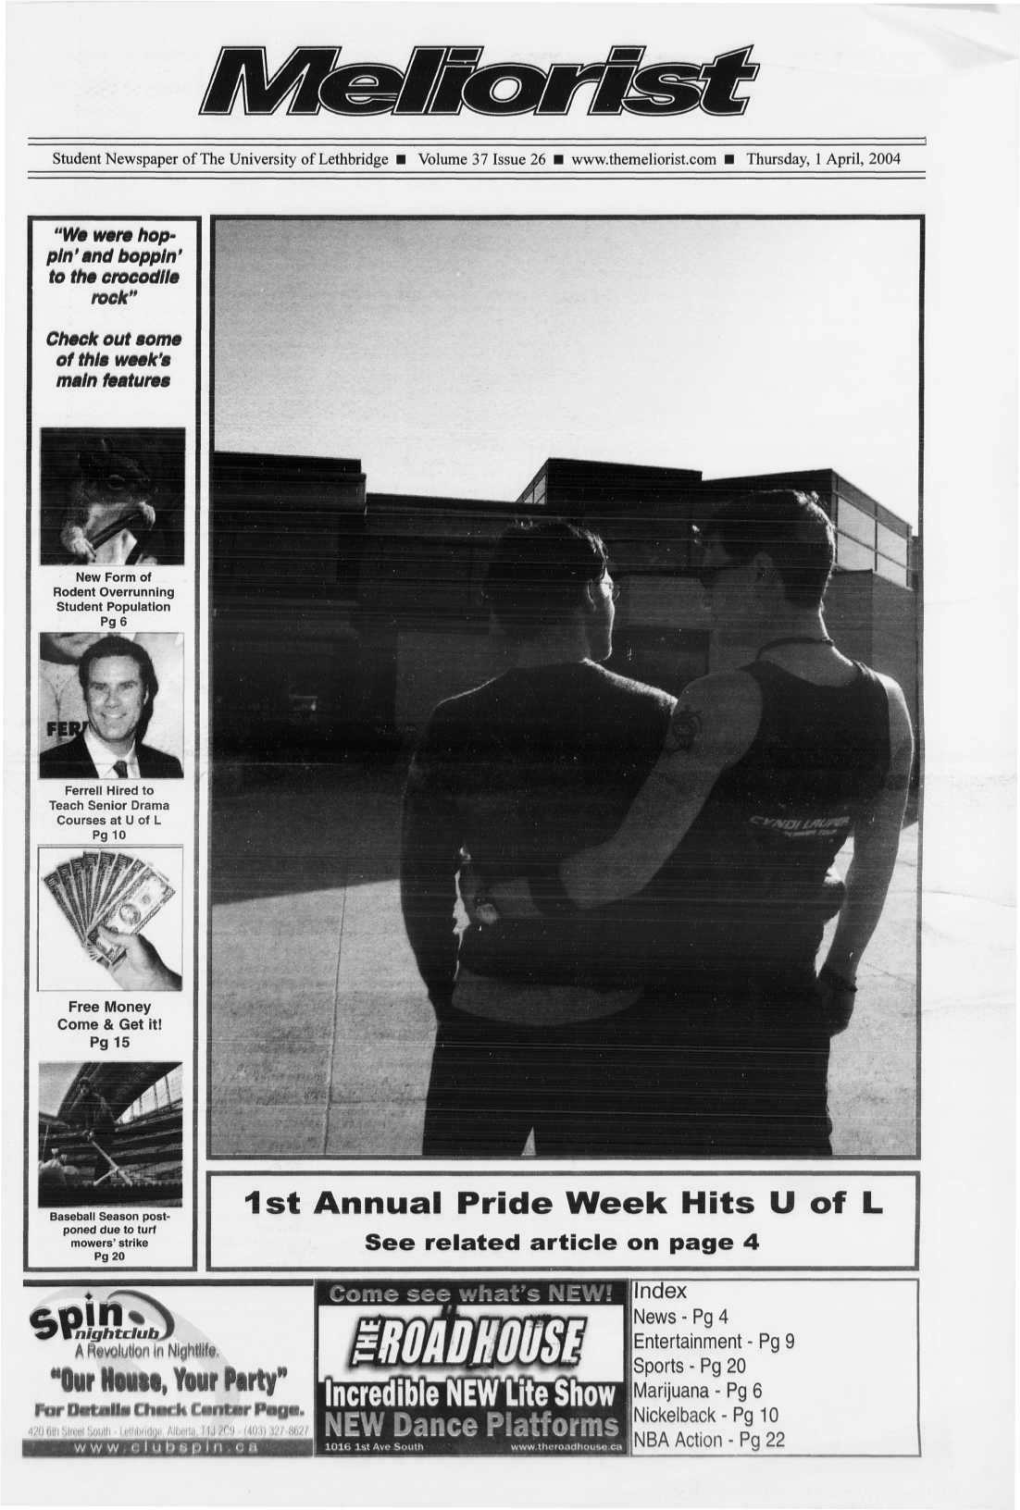 1St Annual Pride Week Hits U of L Poned Due to Turf Mowers' Strike See Related Article on Page 4 Pg20